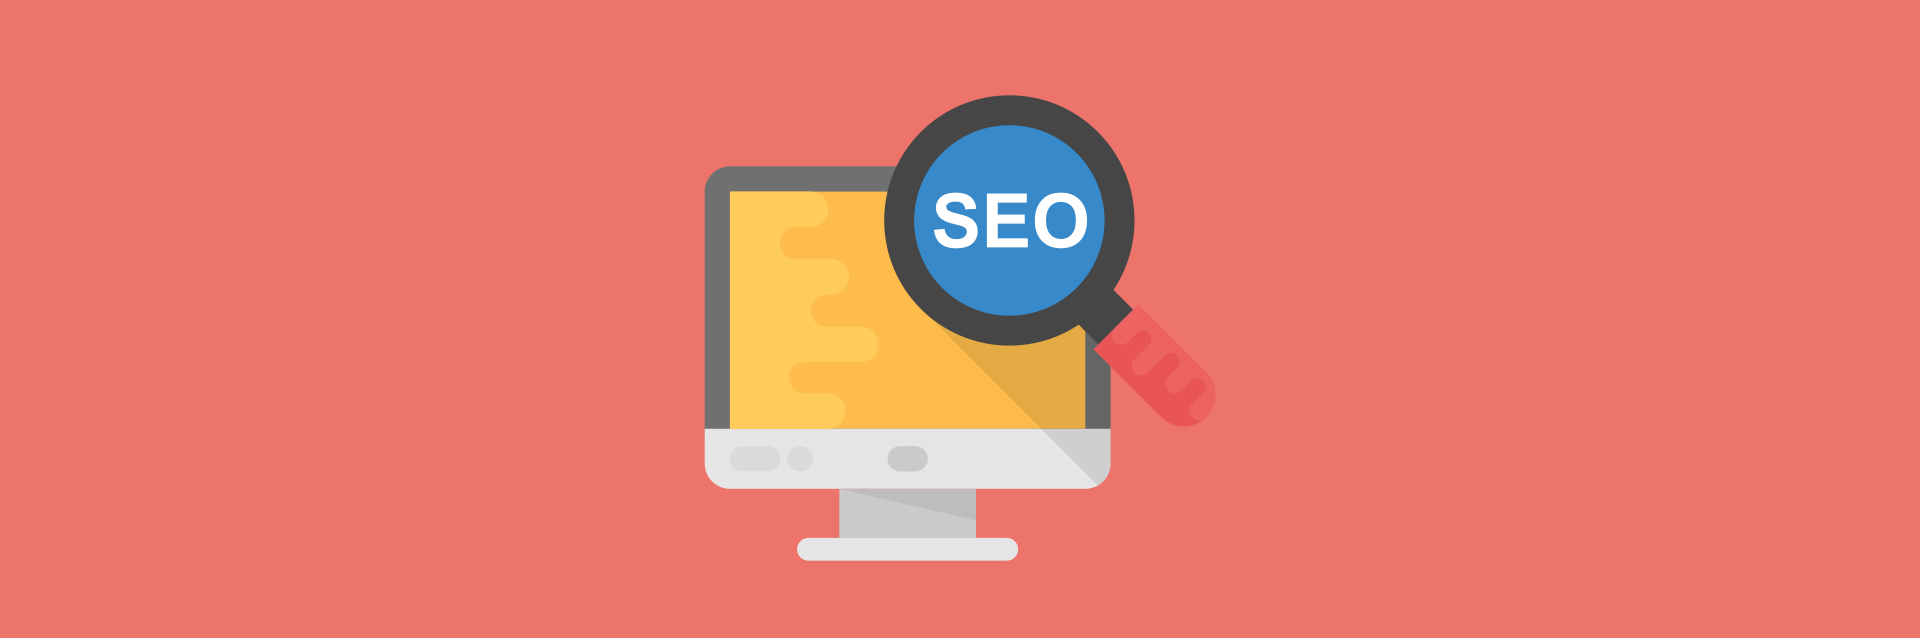 Top 12 Free Online SEO Courses and Certificates You Need to Take!